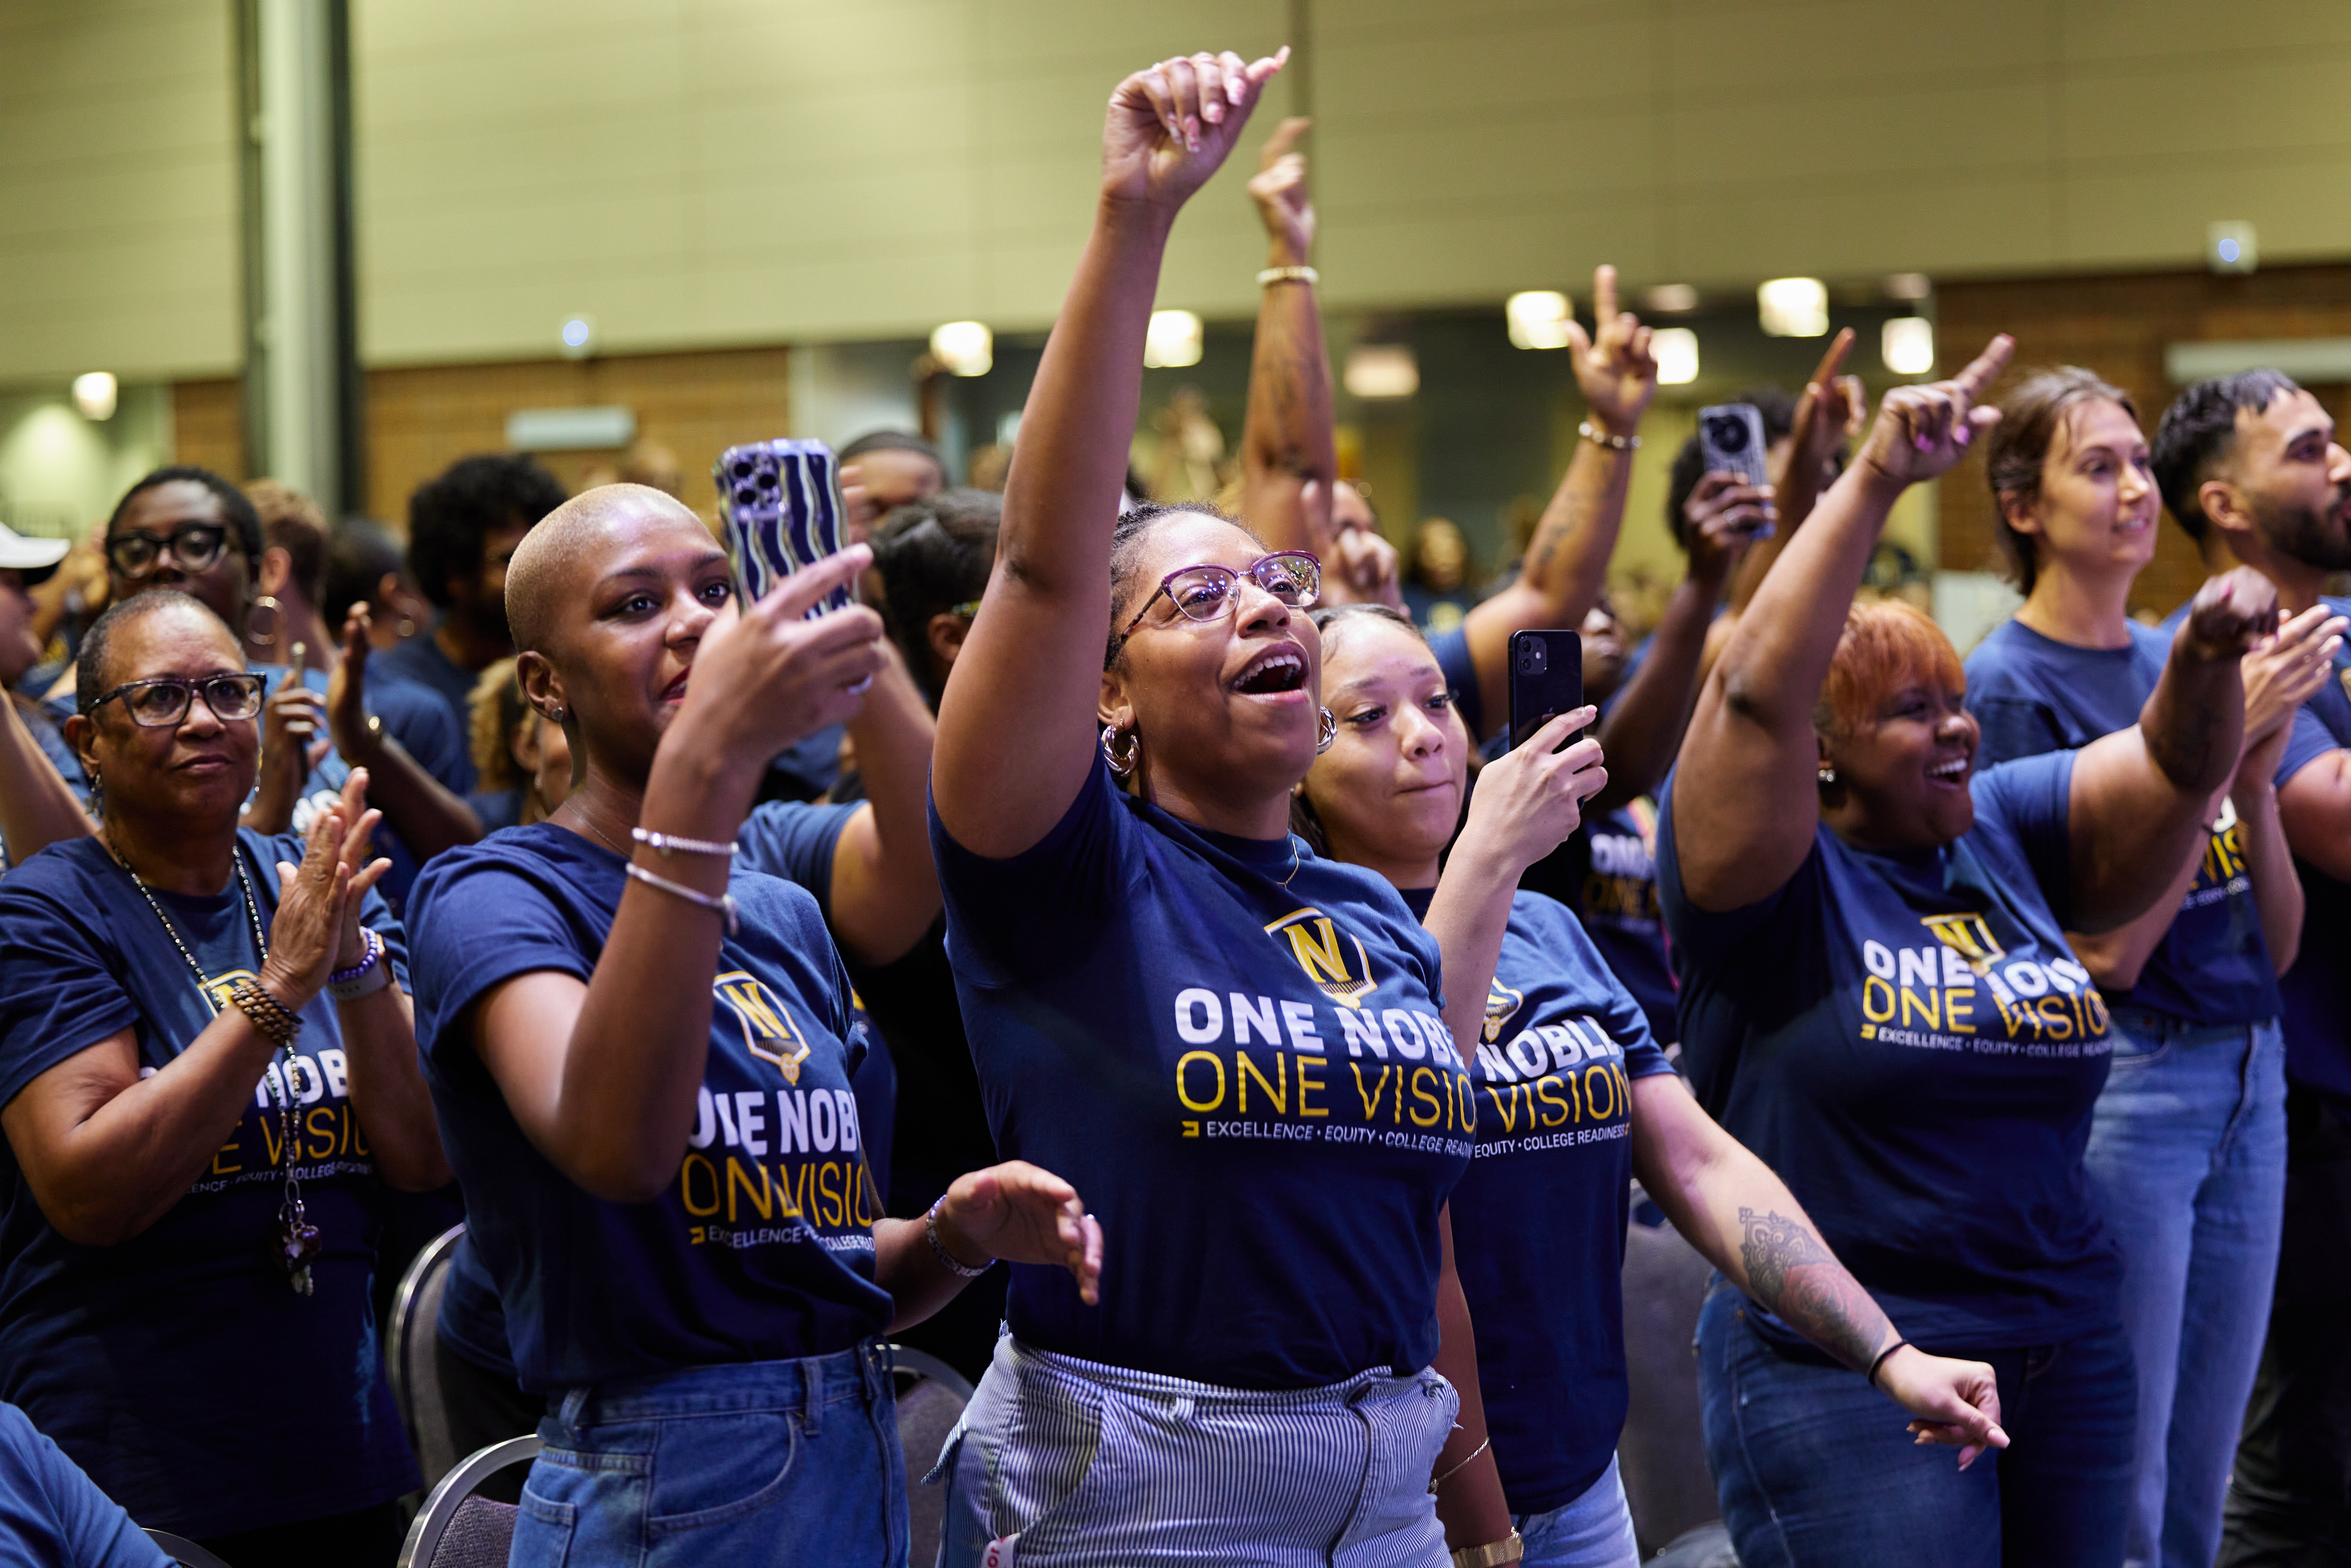 Photo shows a close-up of a group of Noble staff members who are cheering on and filming the Hansberry dance team as they perform. Many have their hands raised or are clapping.